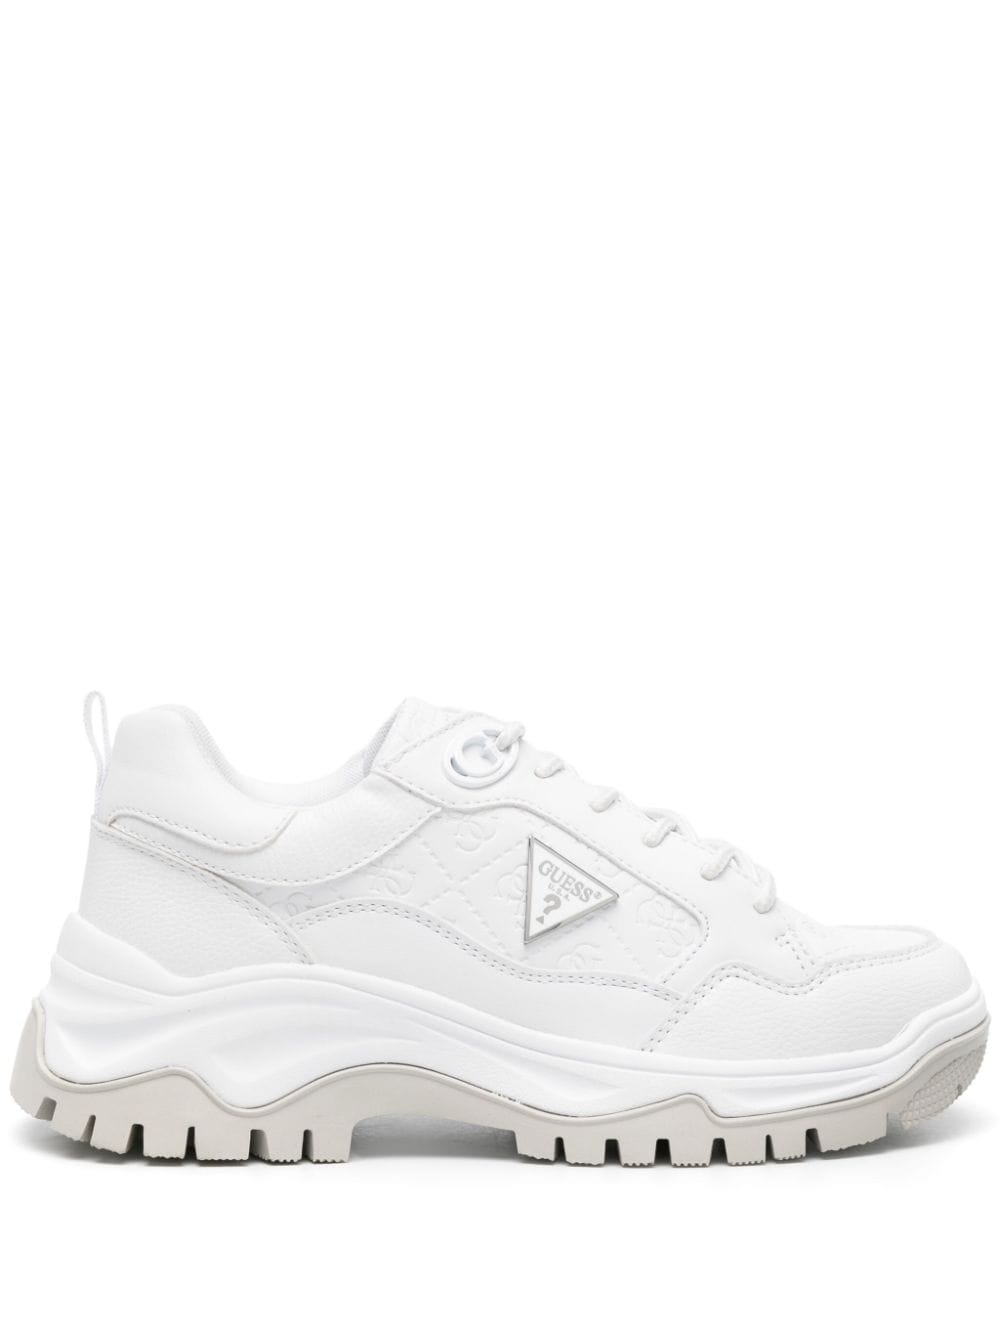 GUESS USA Zaylin panelled chunky sneakers - White von GUESS USA